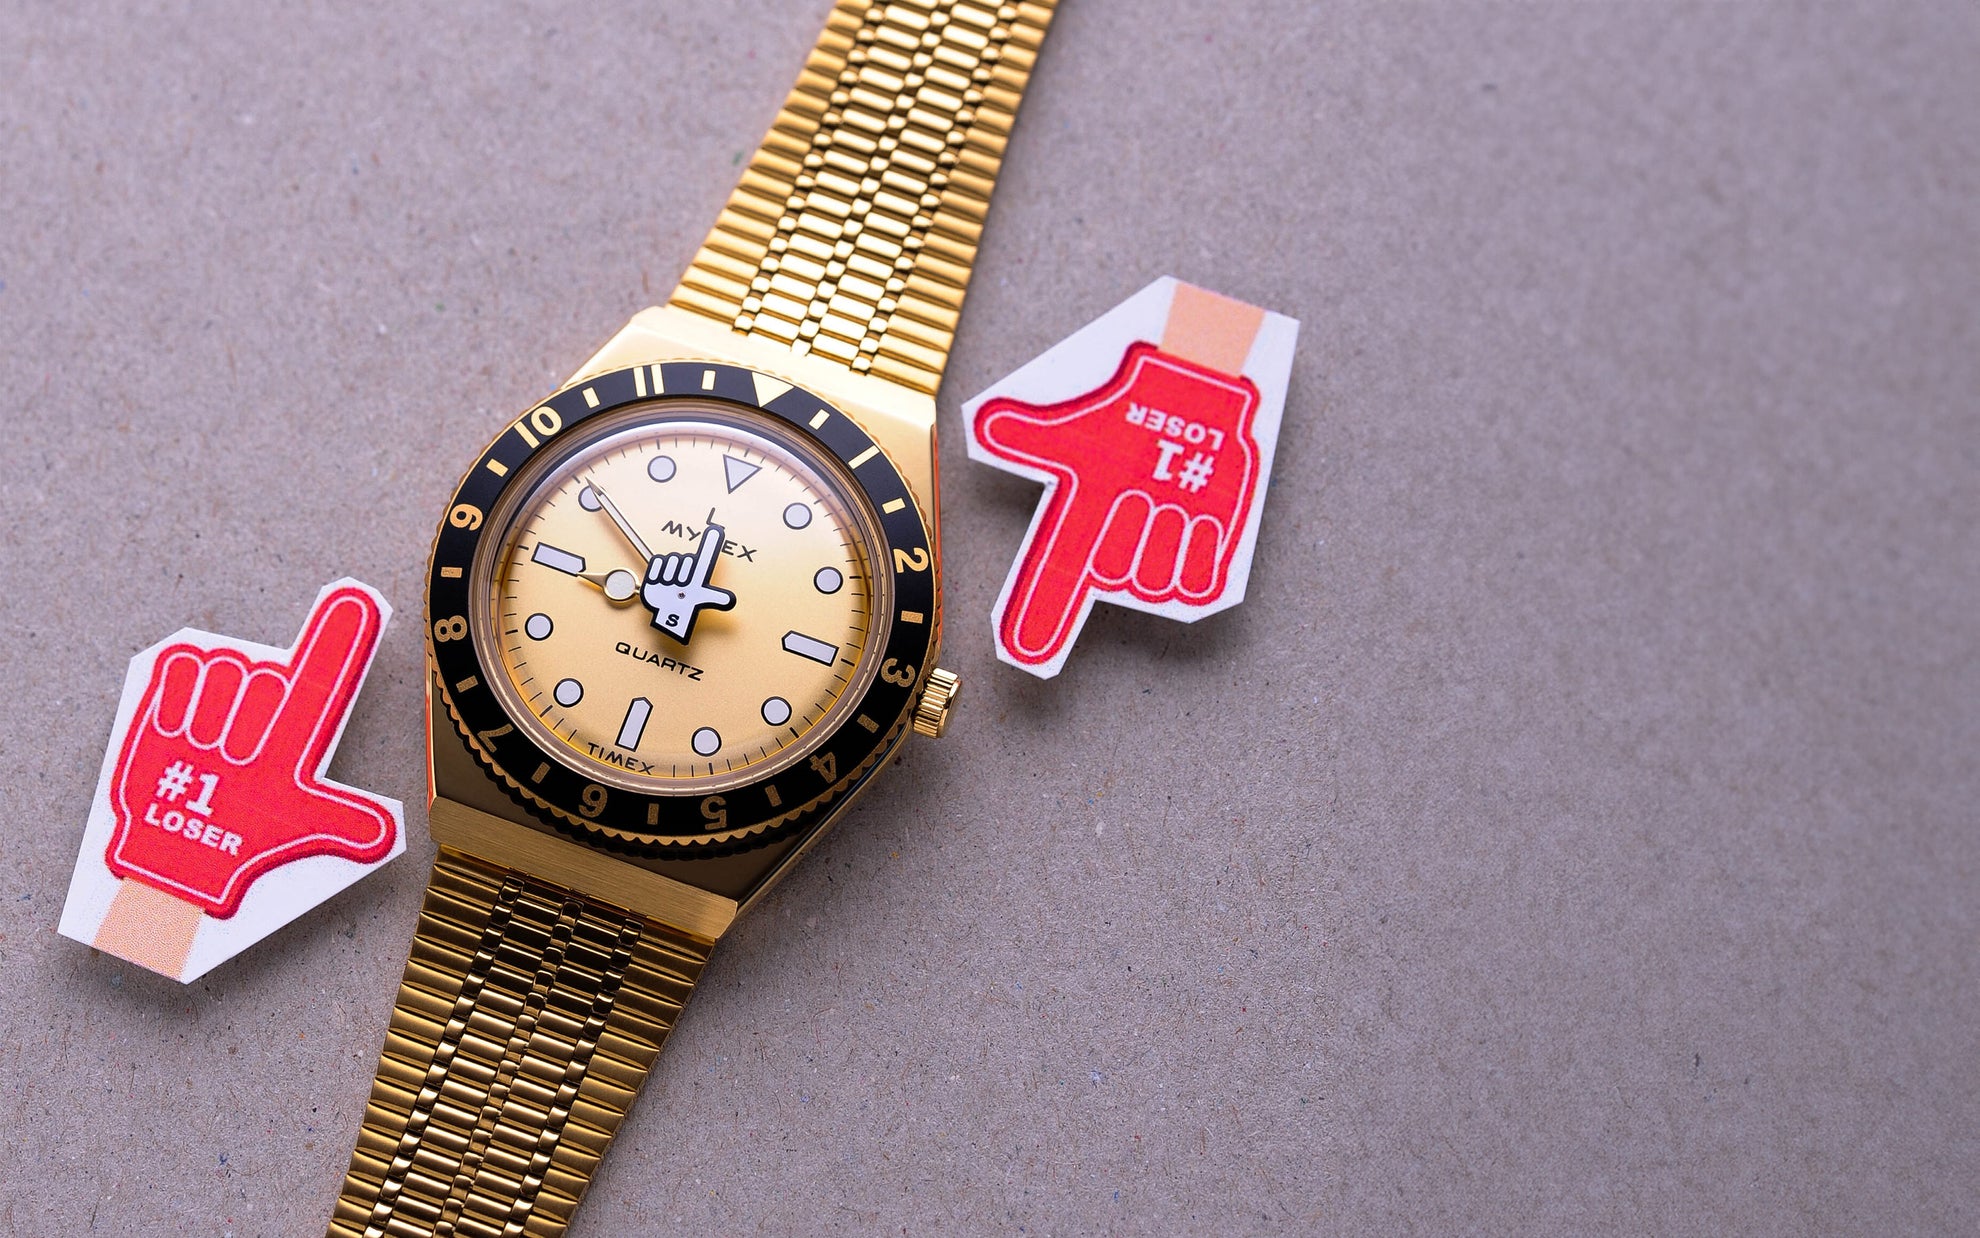 Gold seconde/seconde watch on a grey background with red hand icons either side